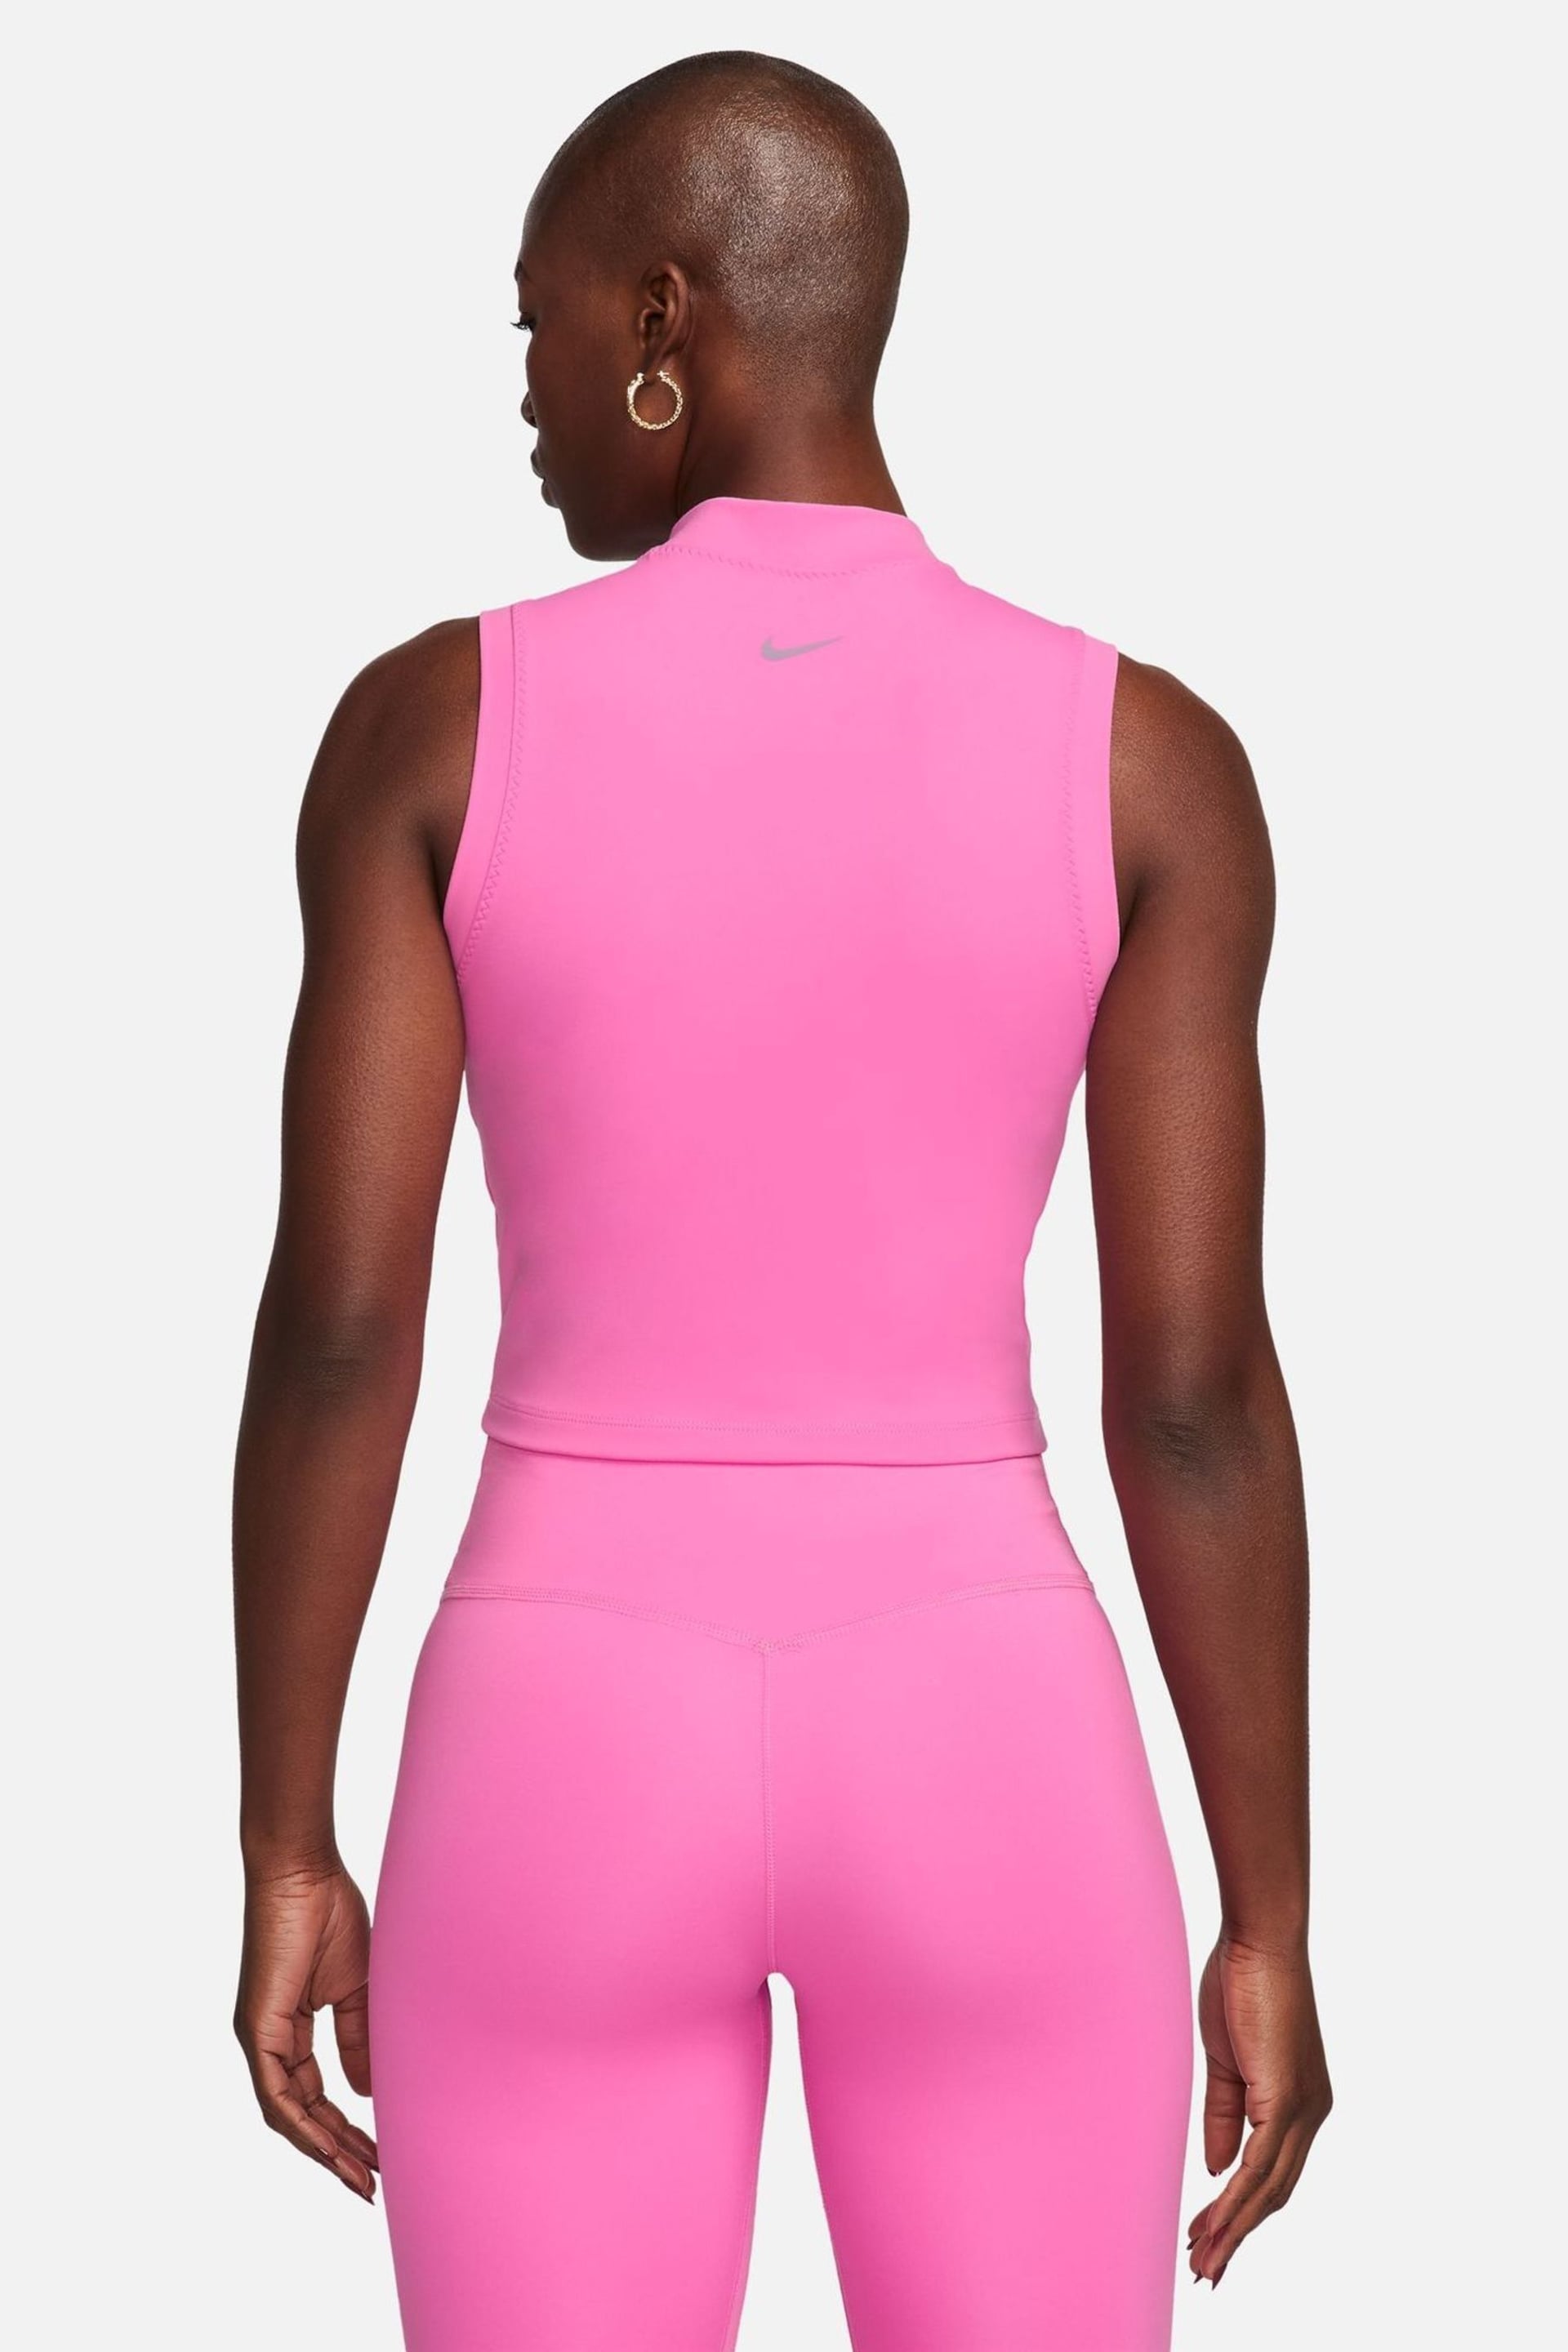 Nike Pink One Dri-FIT Mock Neck Cropped Tank Top - Image 2 of 9